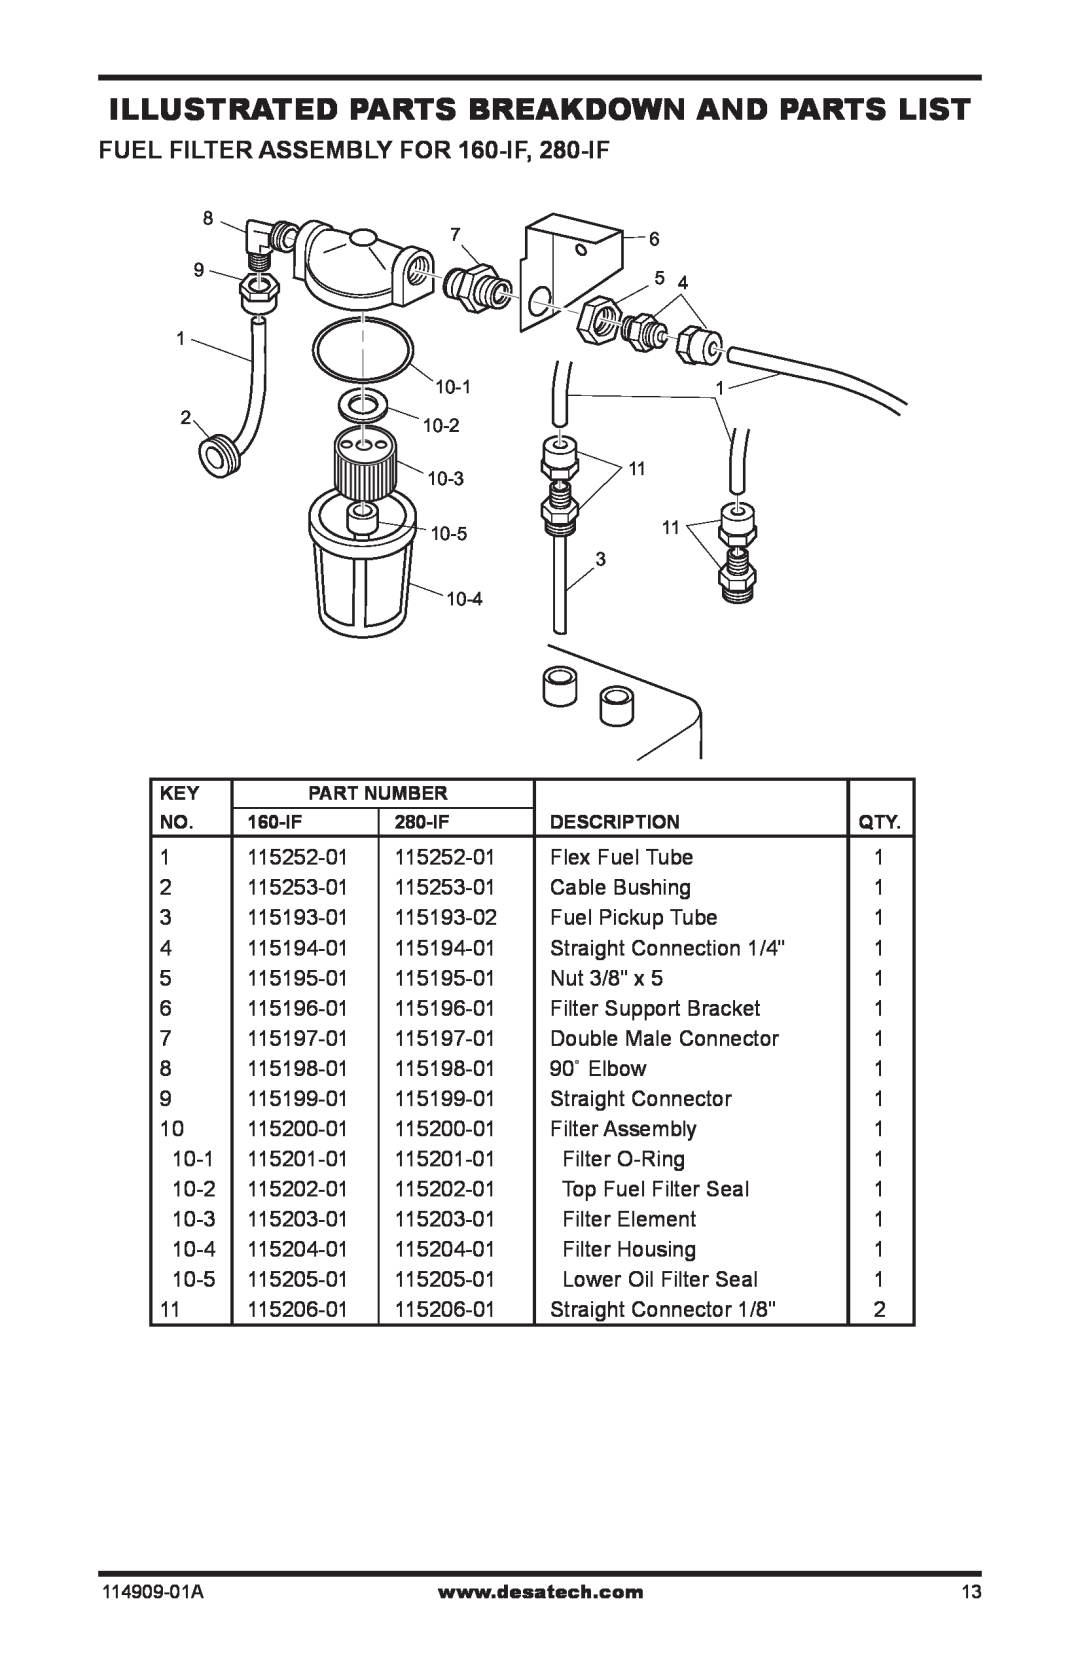 Desa owner manual Illustrated Parts Breakdown And Parts List, FUEL FILTER ASSEMBLY FOR 160-IF, 280-IF 